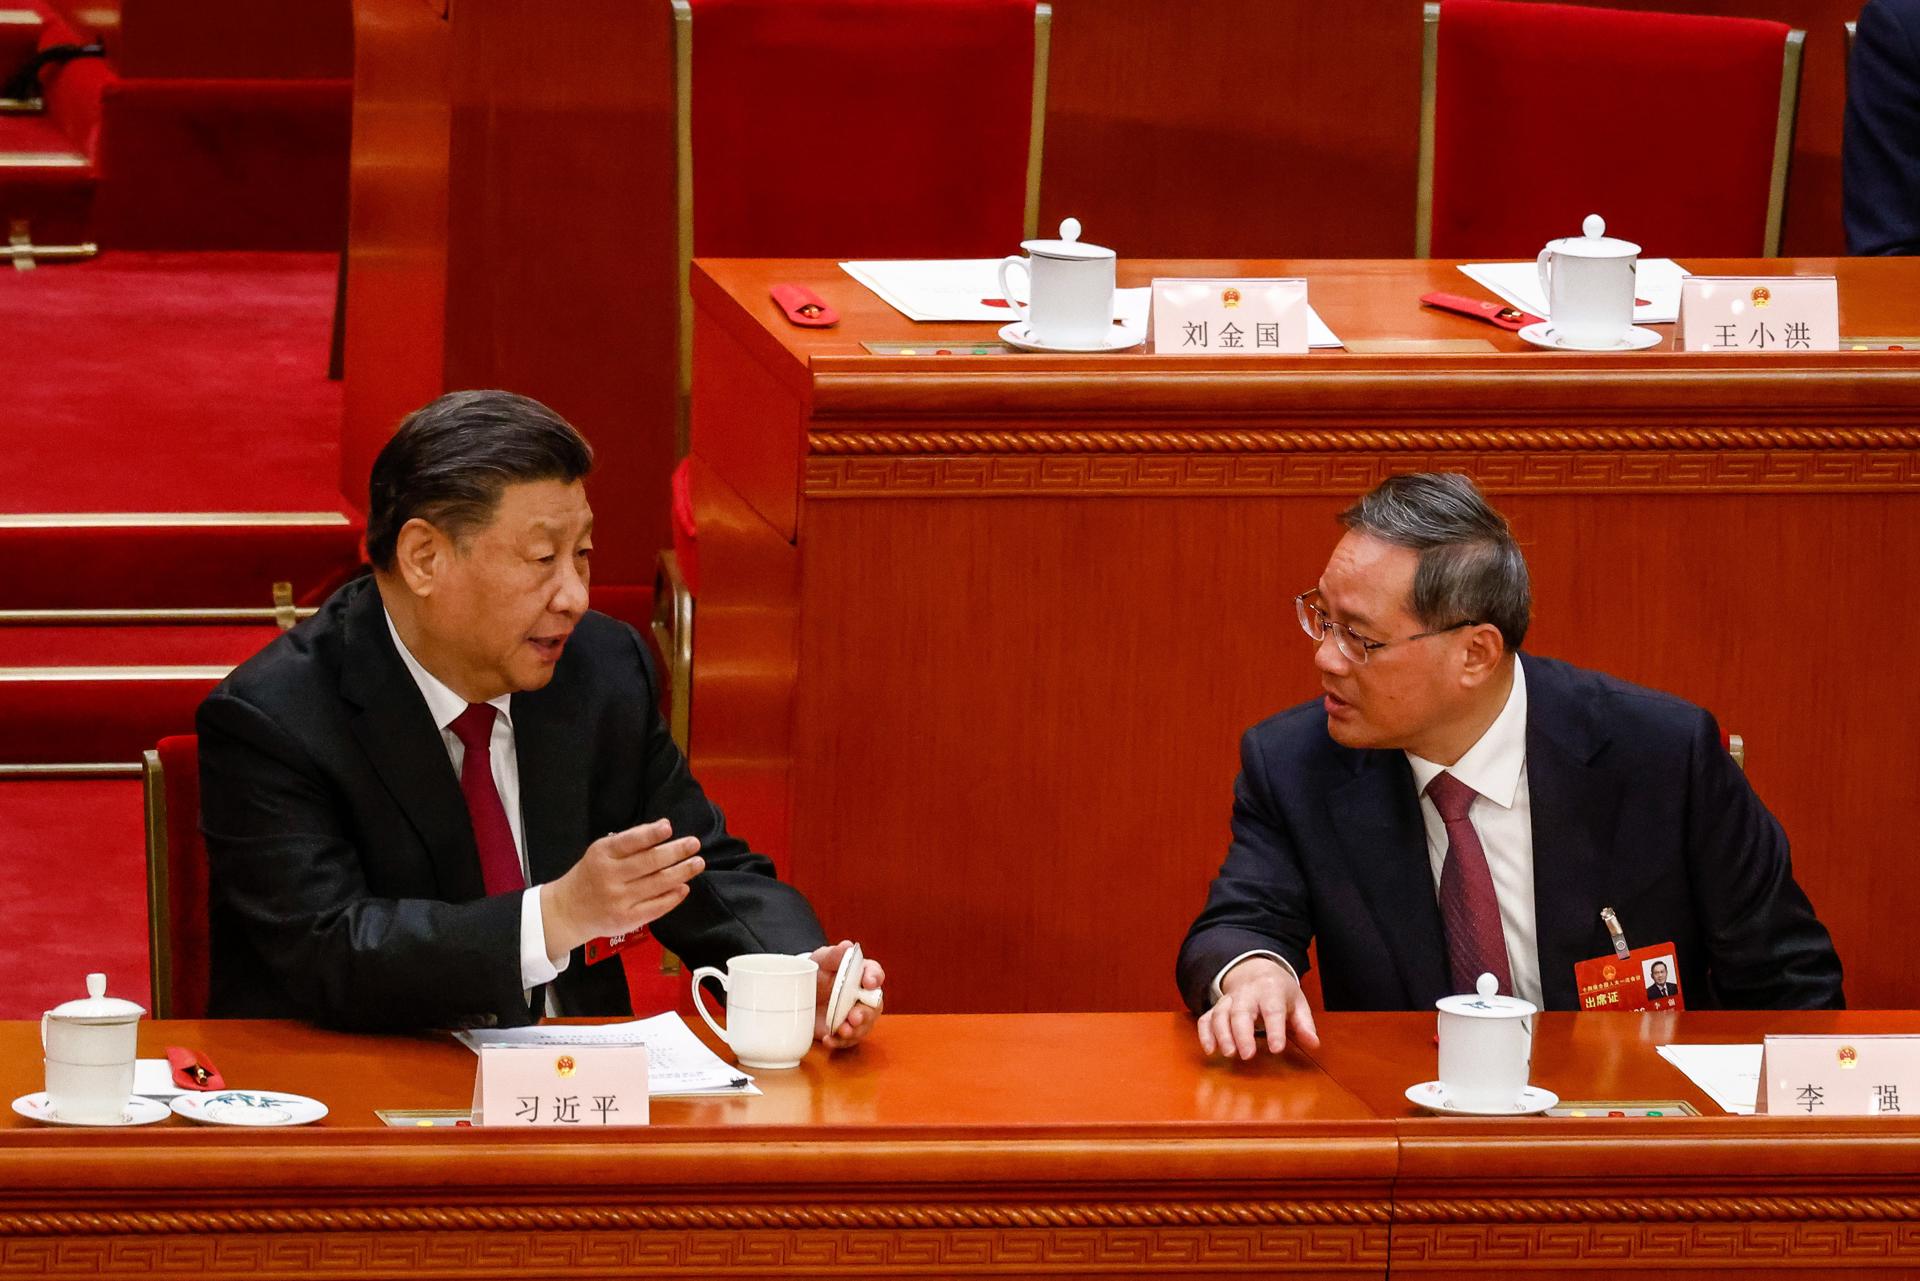 Chinese President Xi Jinping (L) talks to Politburo member Li Qiang during the Third Plenary Session of the National People's Congress (NPC) at the Great Hall of the People, in Beijing, China, 10 March 2023. EFE-EPA/MARK R. CRISTINO/POOL
